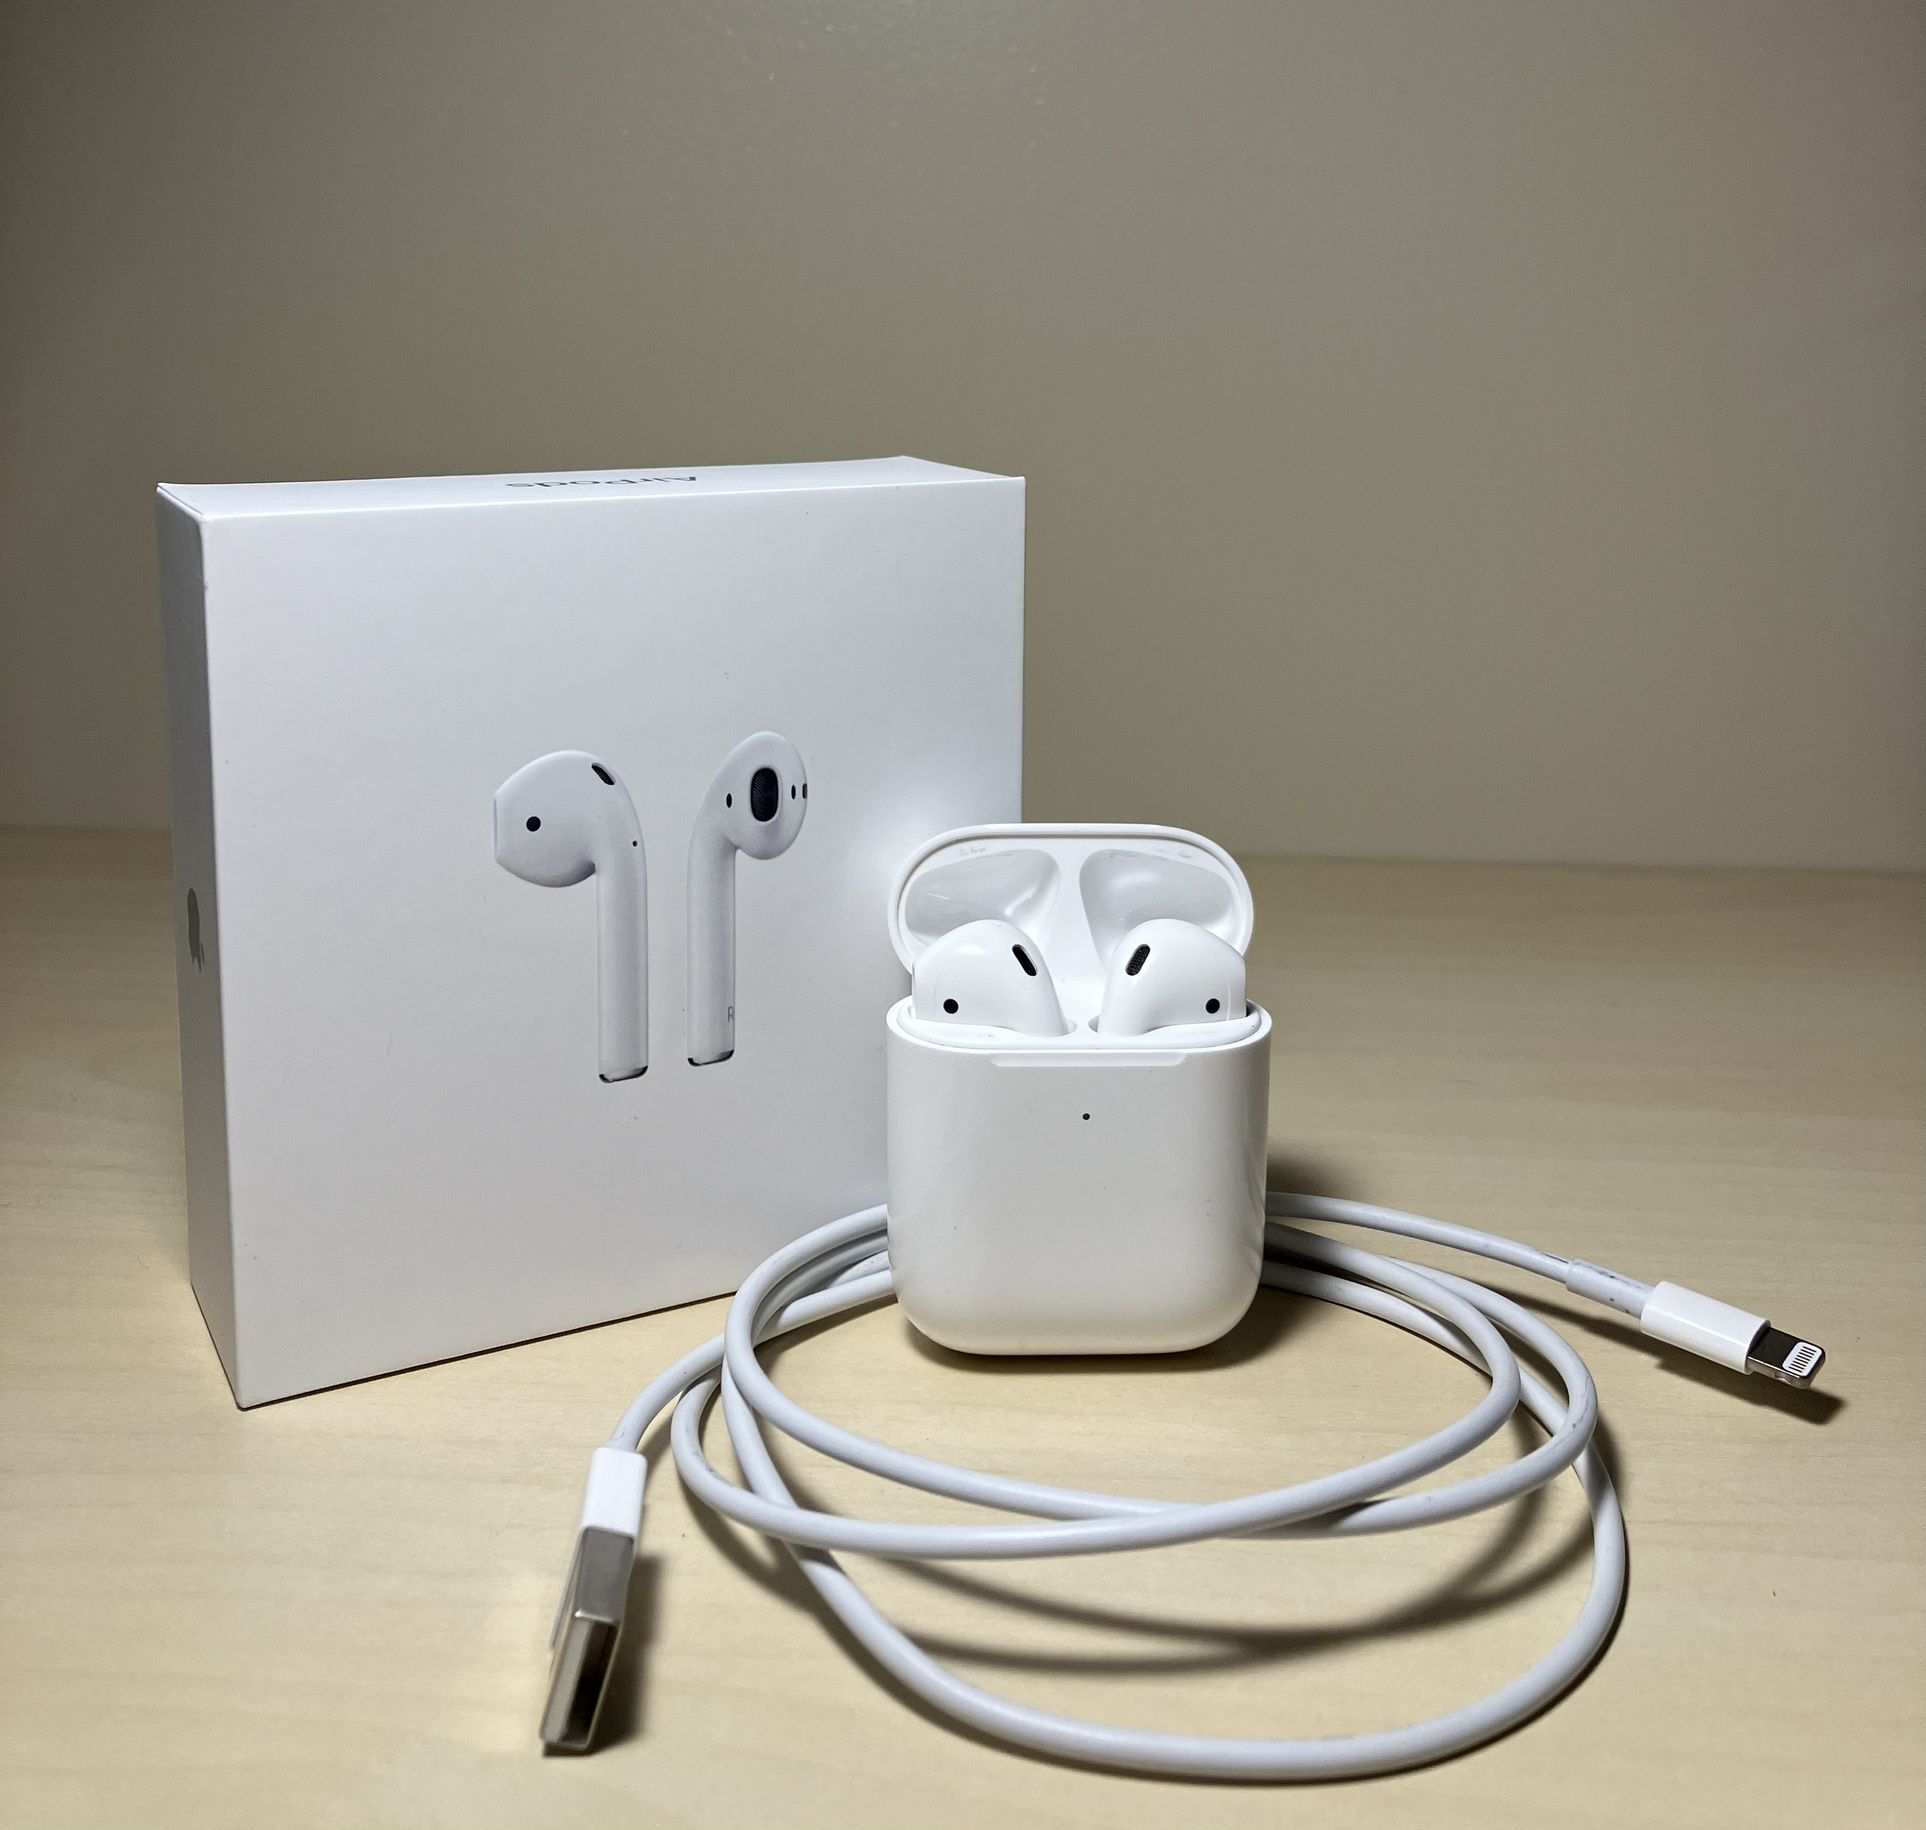 Apple AirPods 2 generation. Pick up available 